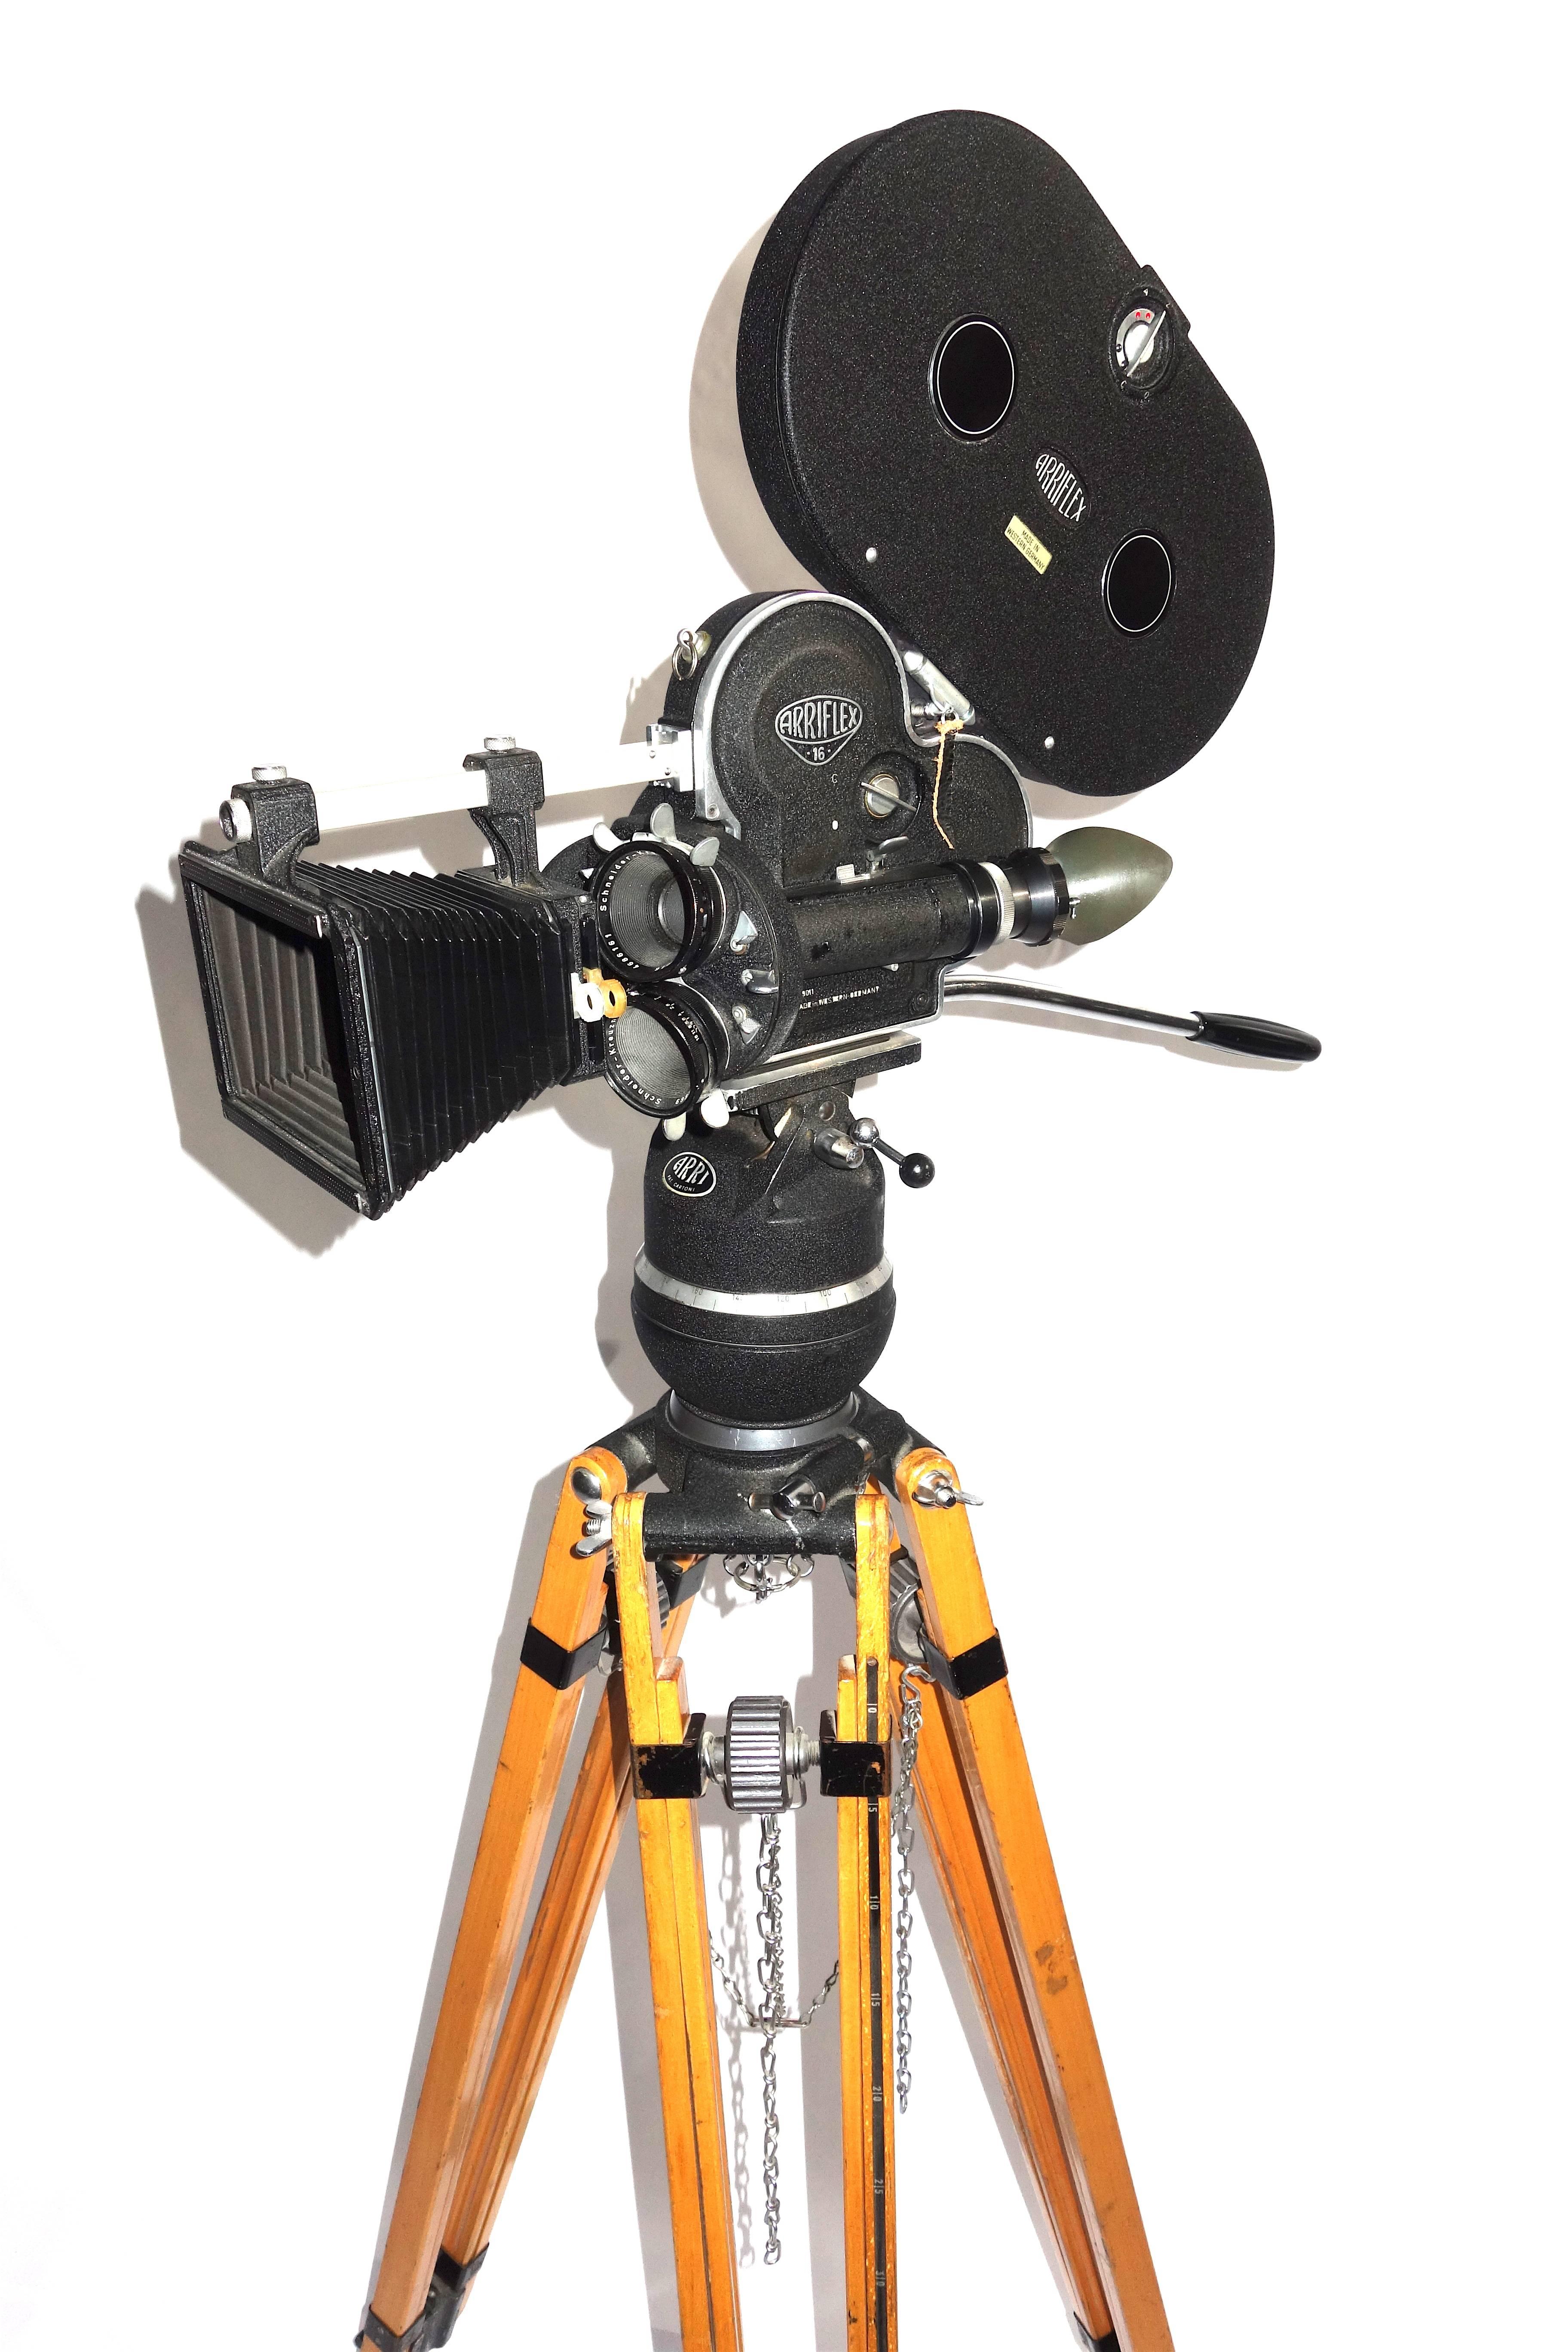 Note: 
This antique May qualify for our Gallery wide ~EXTRA~ 10-25% off sale, 
Going on now.
~~~~~~~~~~~~~~~~~~~~~~~~~~~~~~~~~~~~~~~~~~~~~~~~~~~~~~~~~~~


The Arriflex 16ST was introduced in 1952 by Arriflex (Arnold and Richter) of Germany. It was